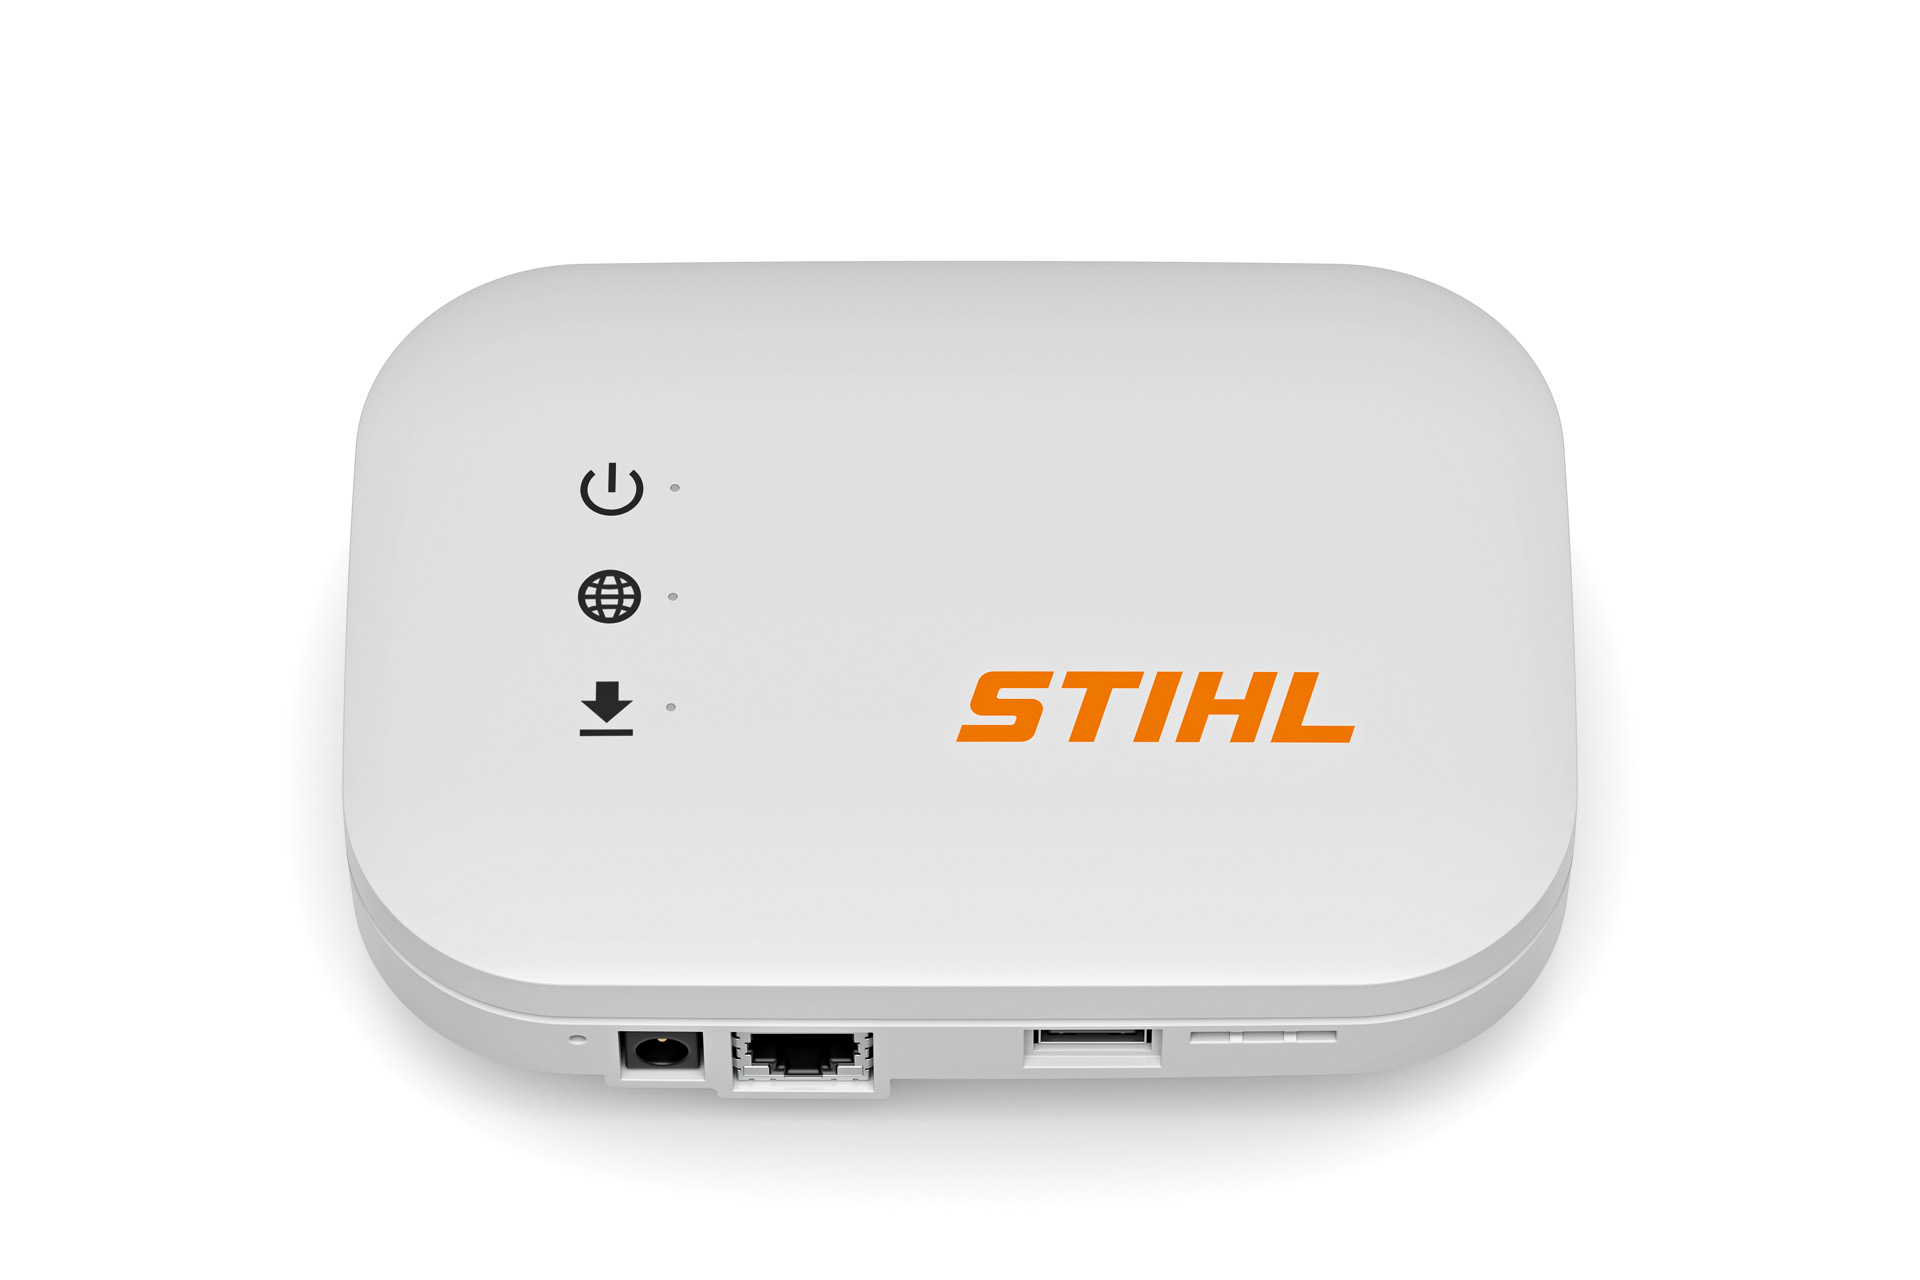 STIHL connected mobile box